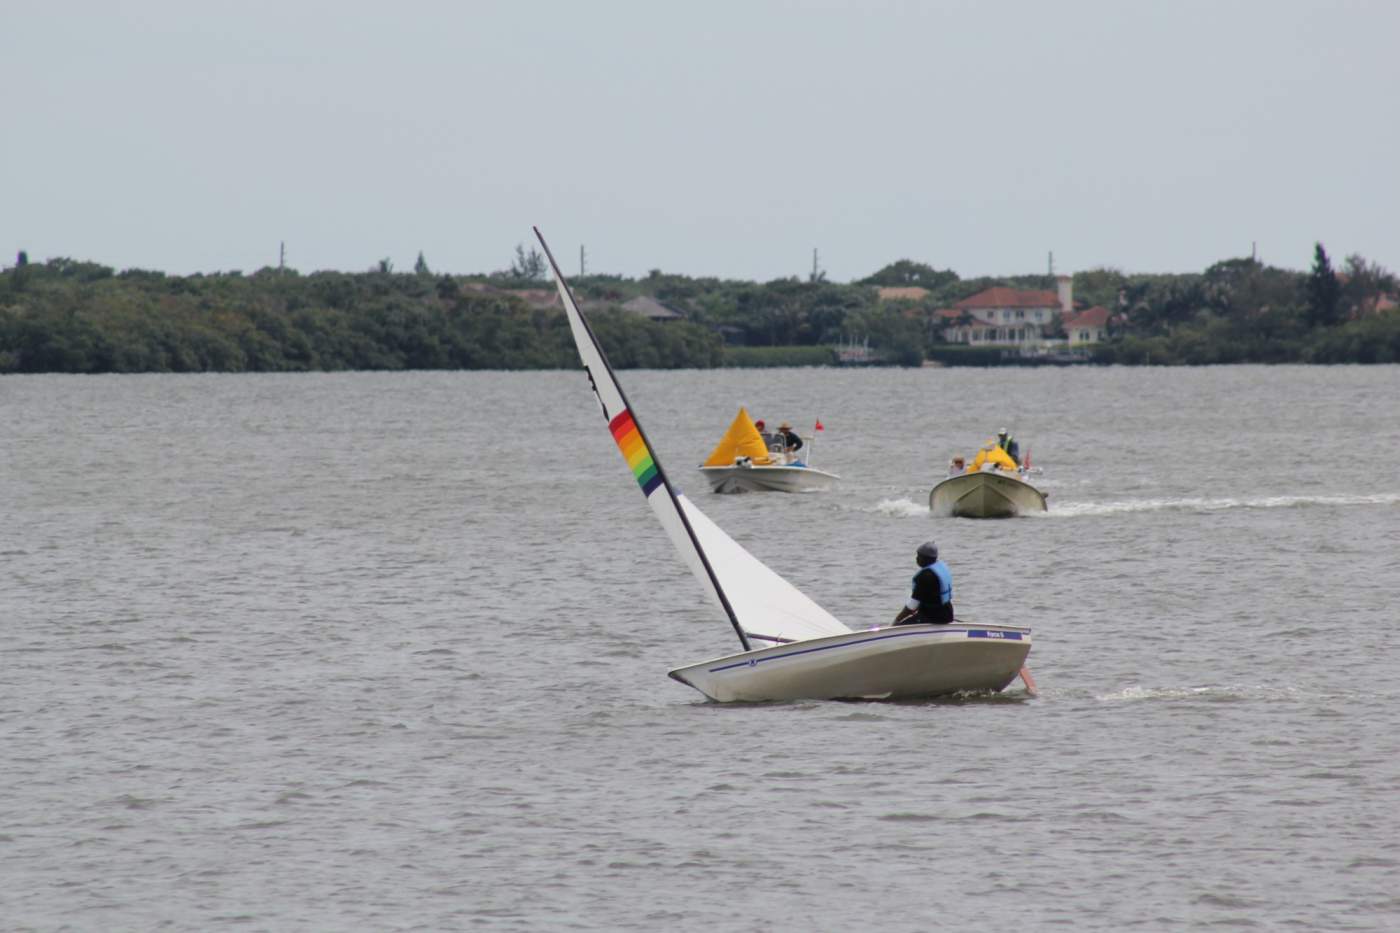 Boat with rainbow sail on the water